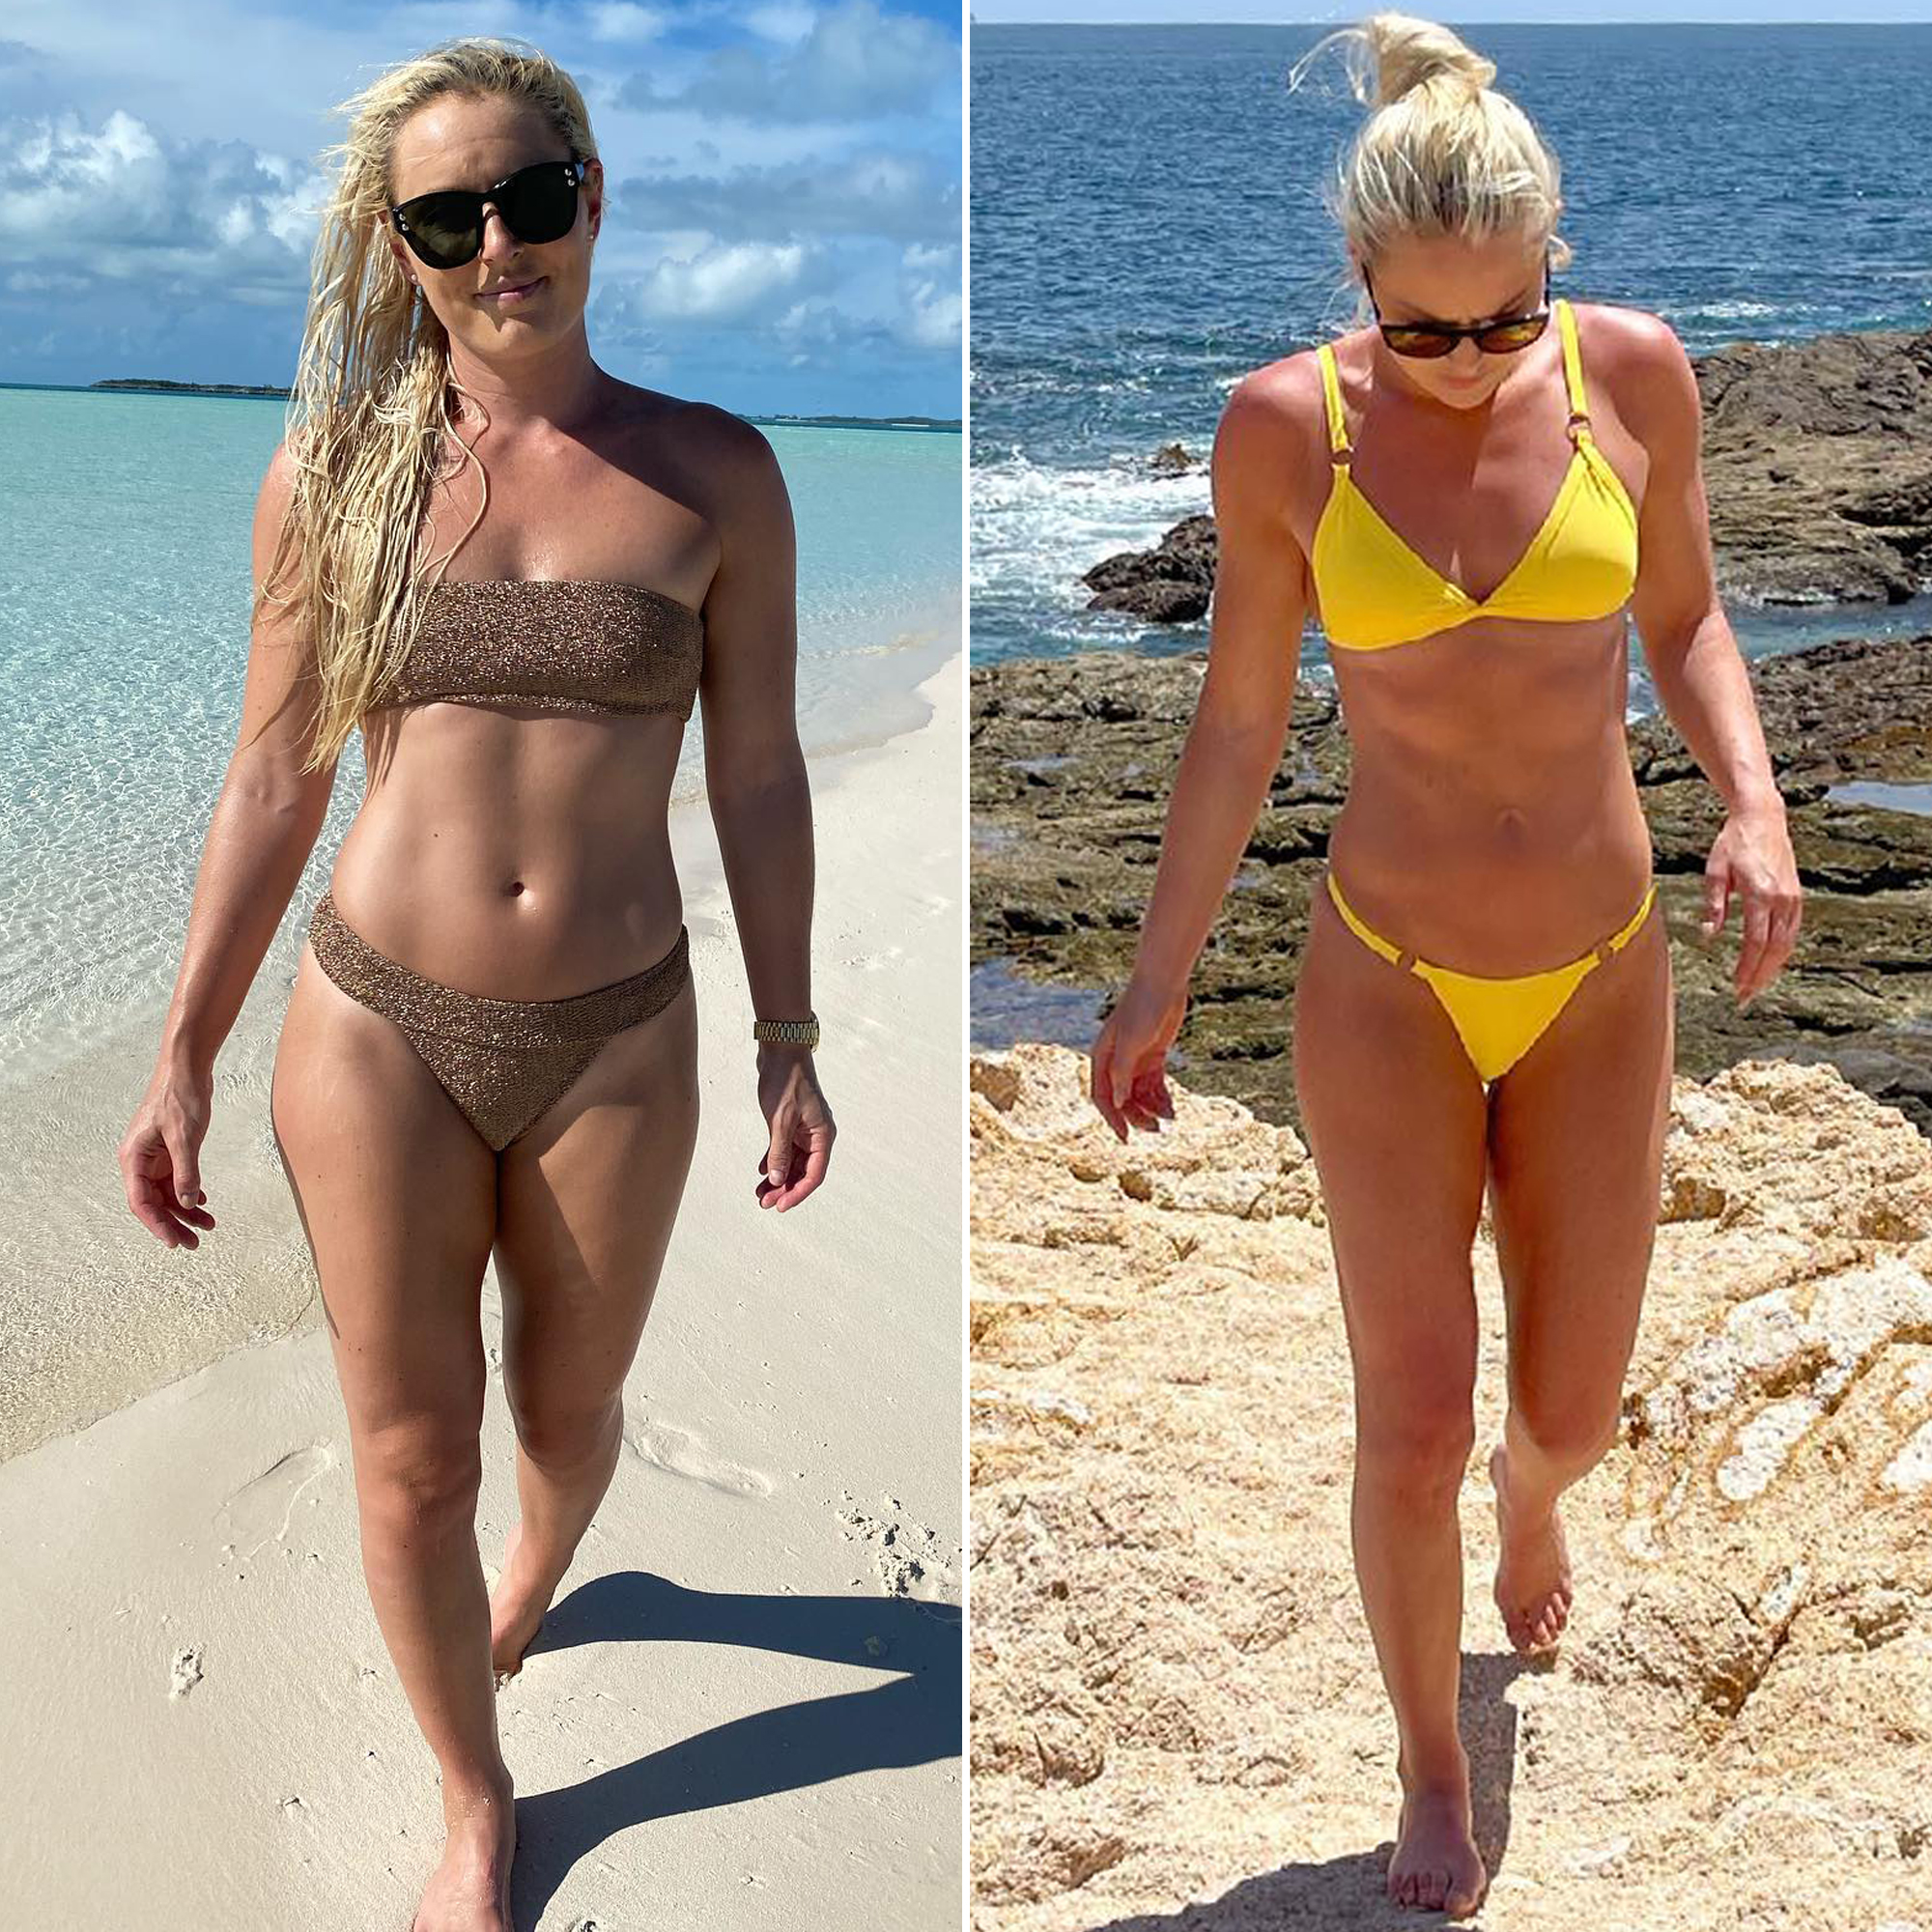 Milf Nude Beach Video - Lindsey Vonn's Bikini Photos: See Her Sexiest Swimsuit Pictures